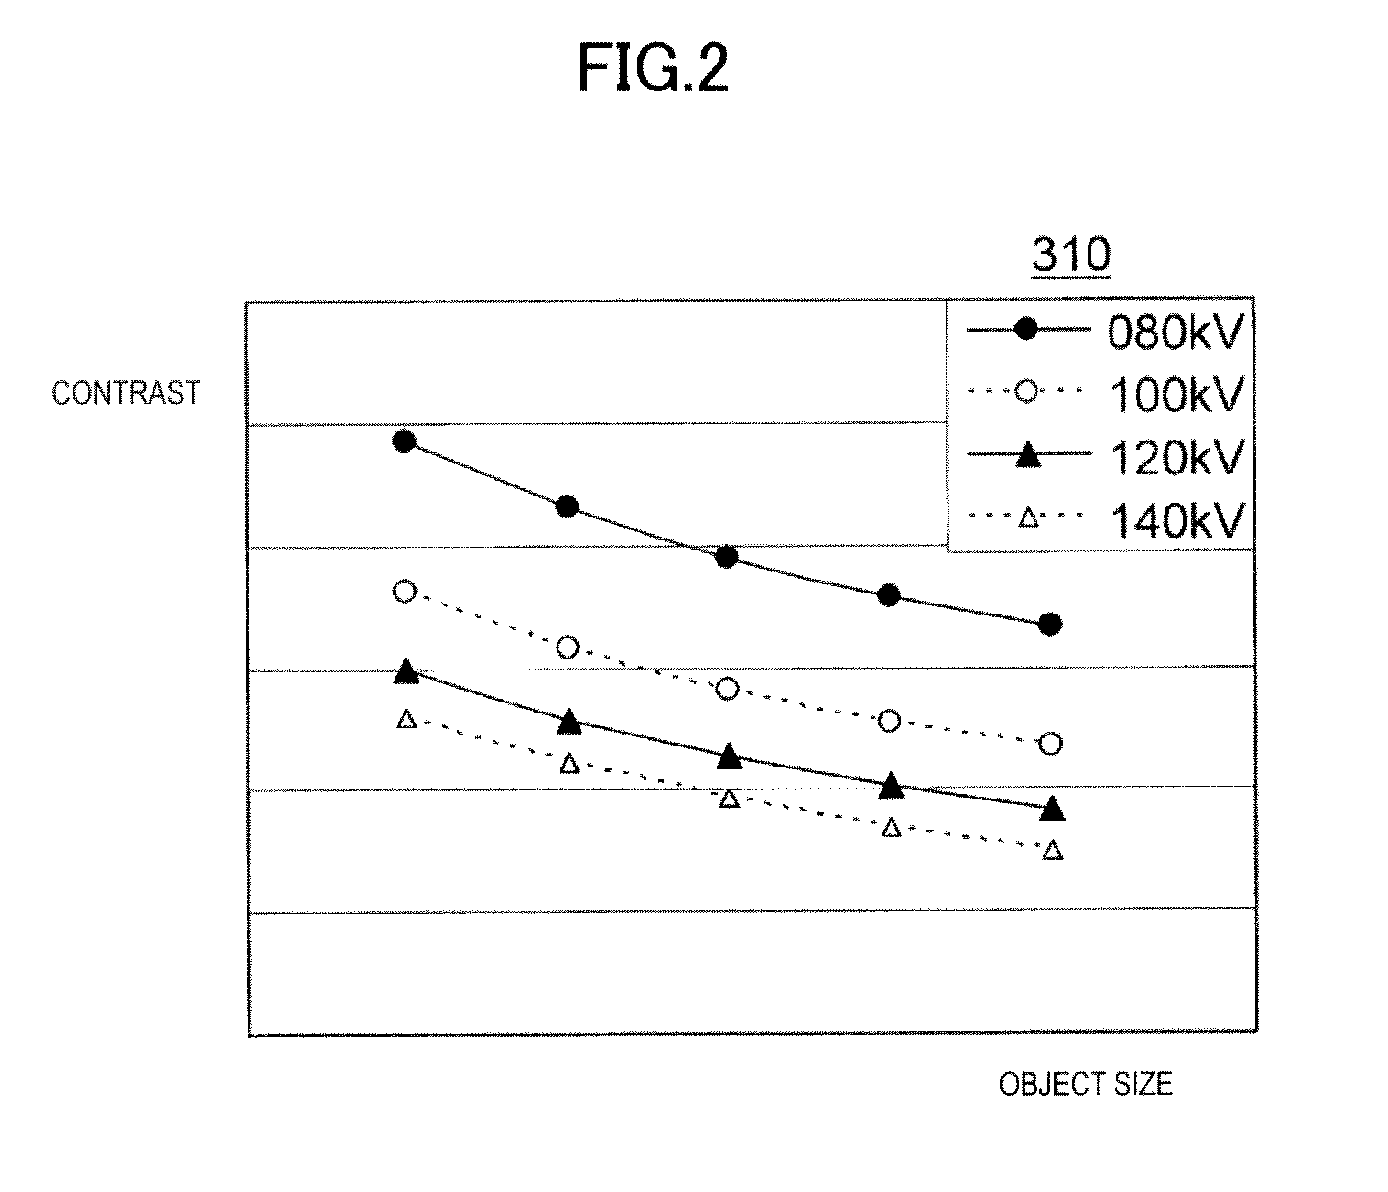 X-ray CT apparatus and tube current determination method